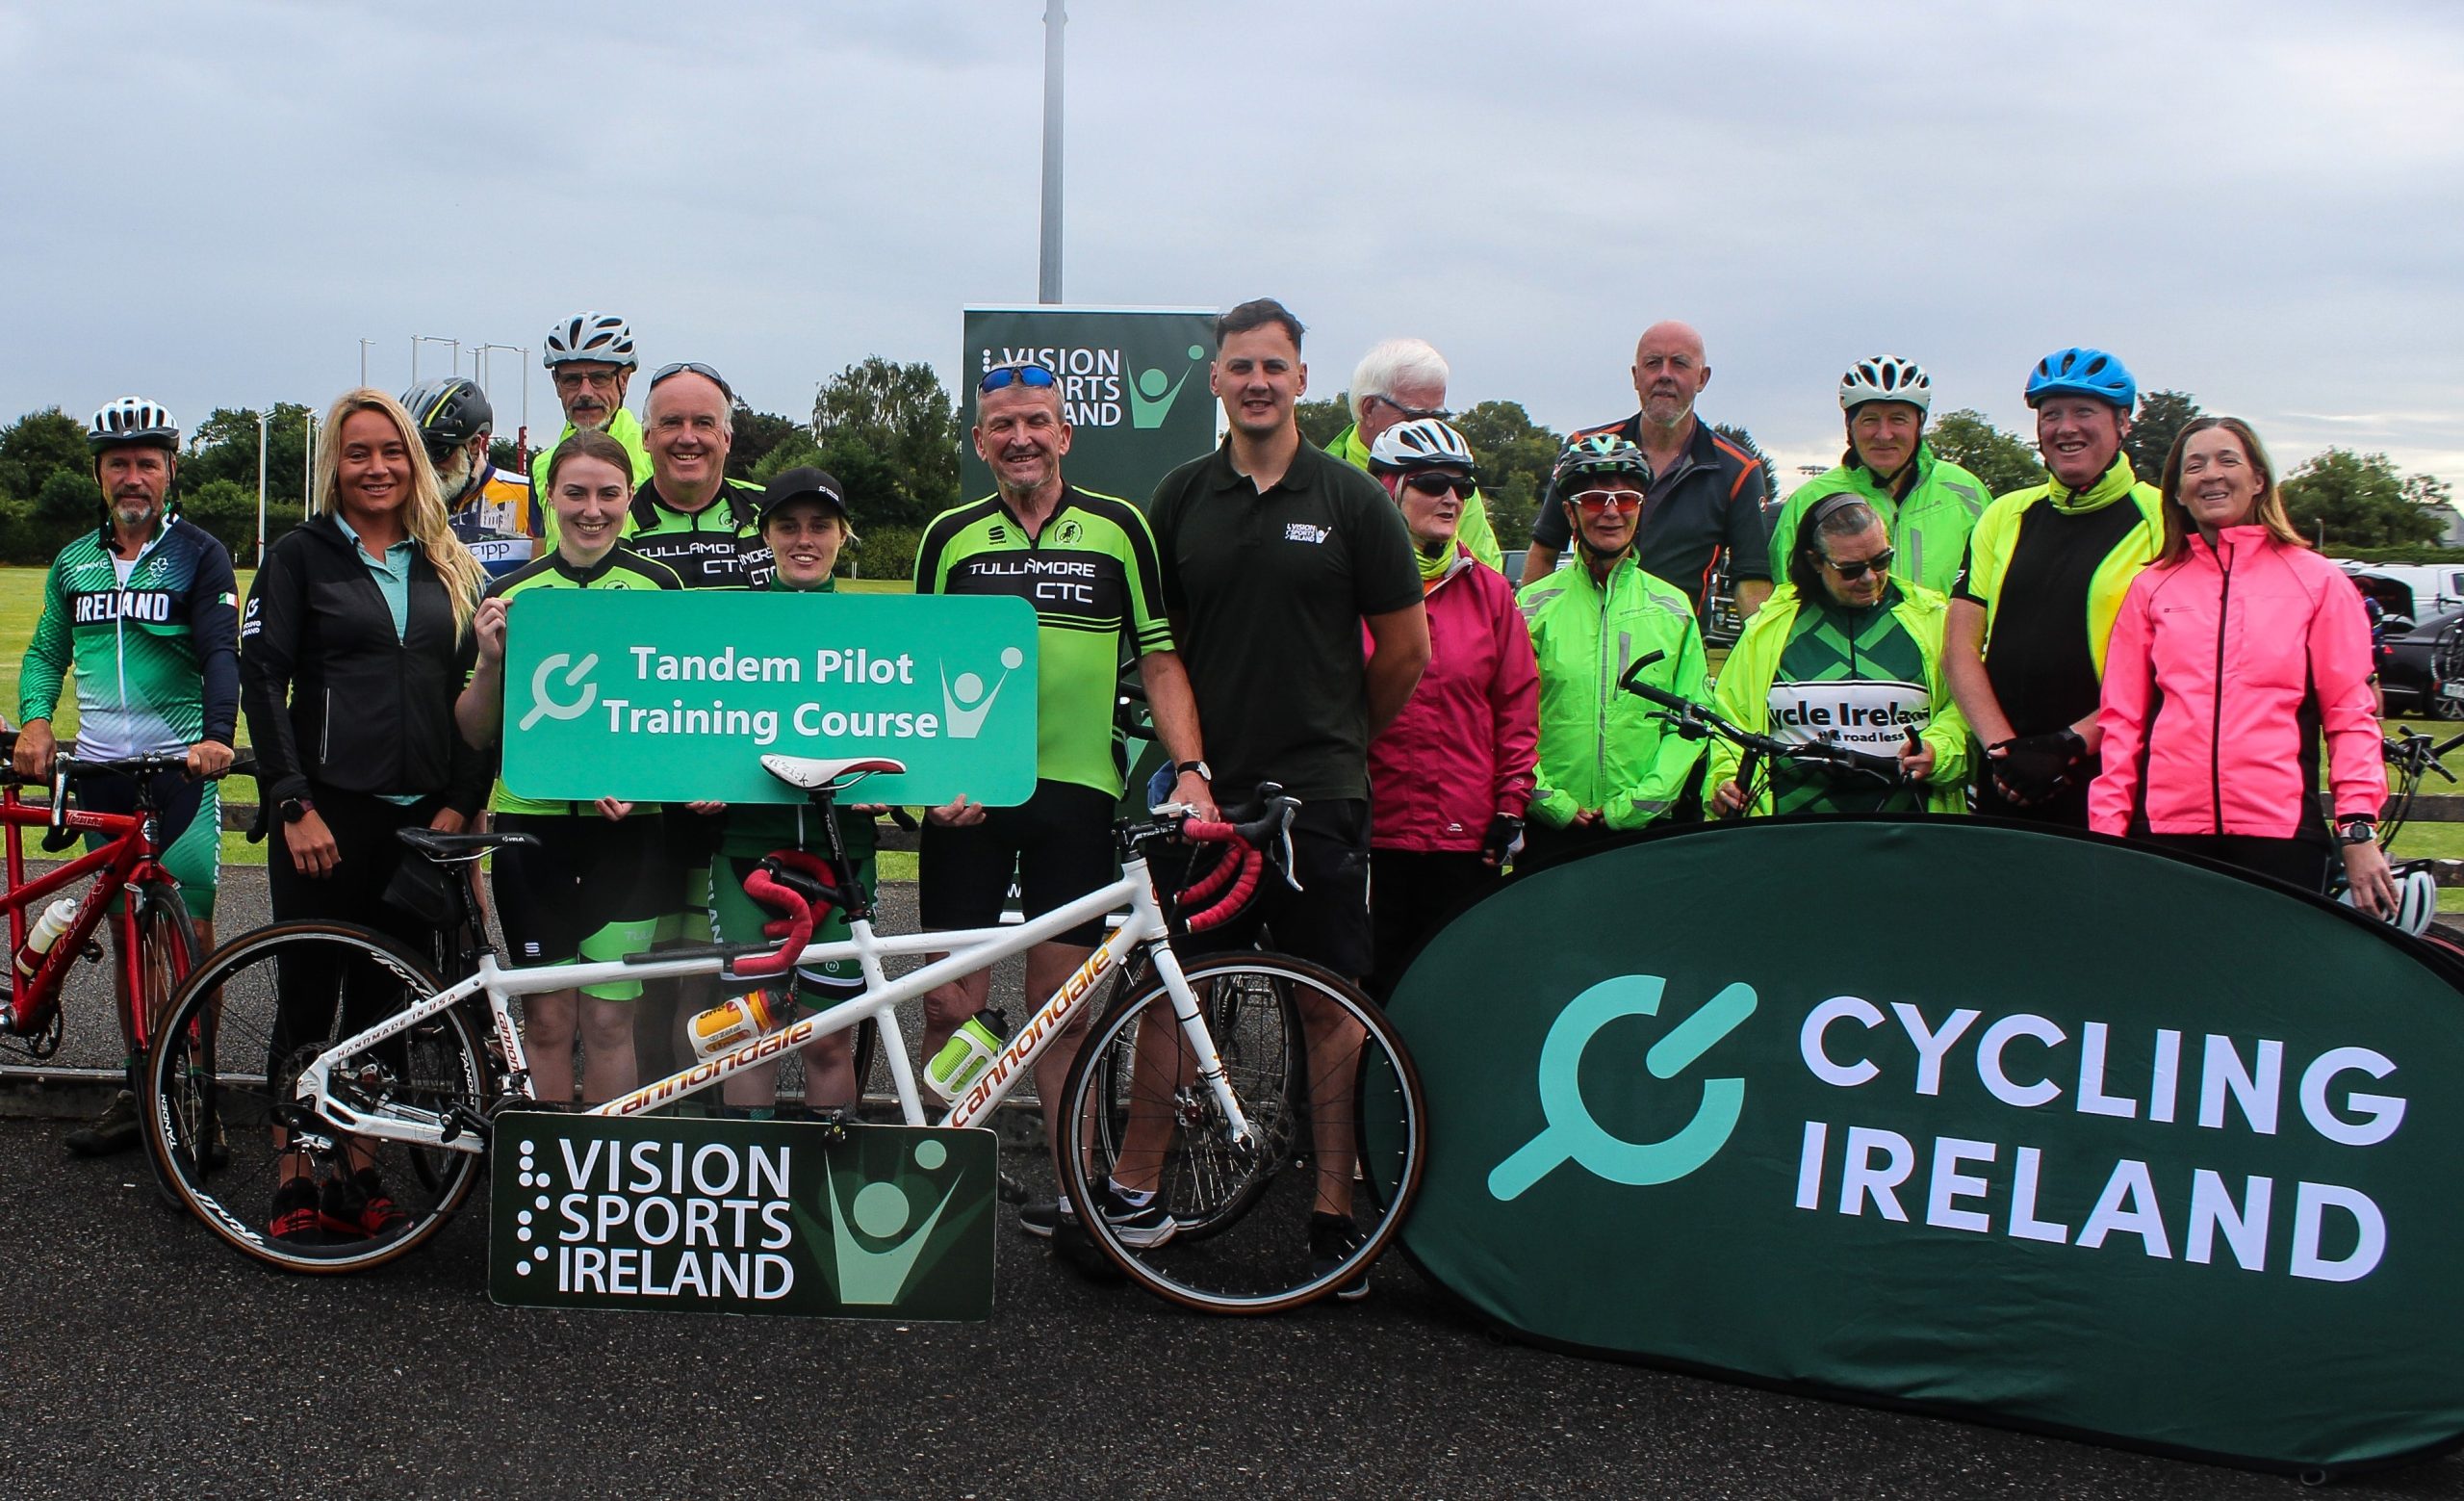 Group photo of tandem pilots and stokers holding up signs with VSI, tandem pilot training course and cycling Ireland logos . There are also some tandem bikes standing in front of the people